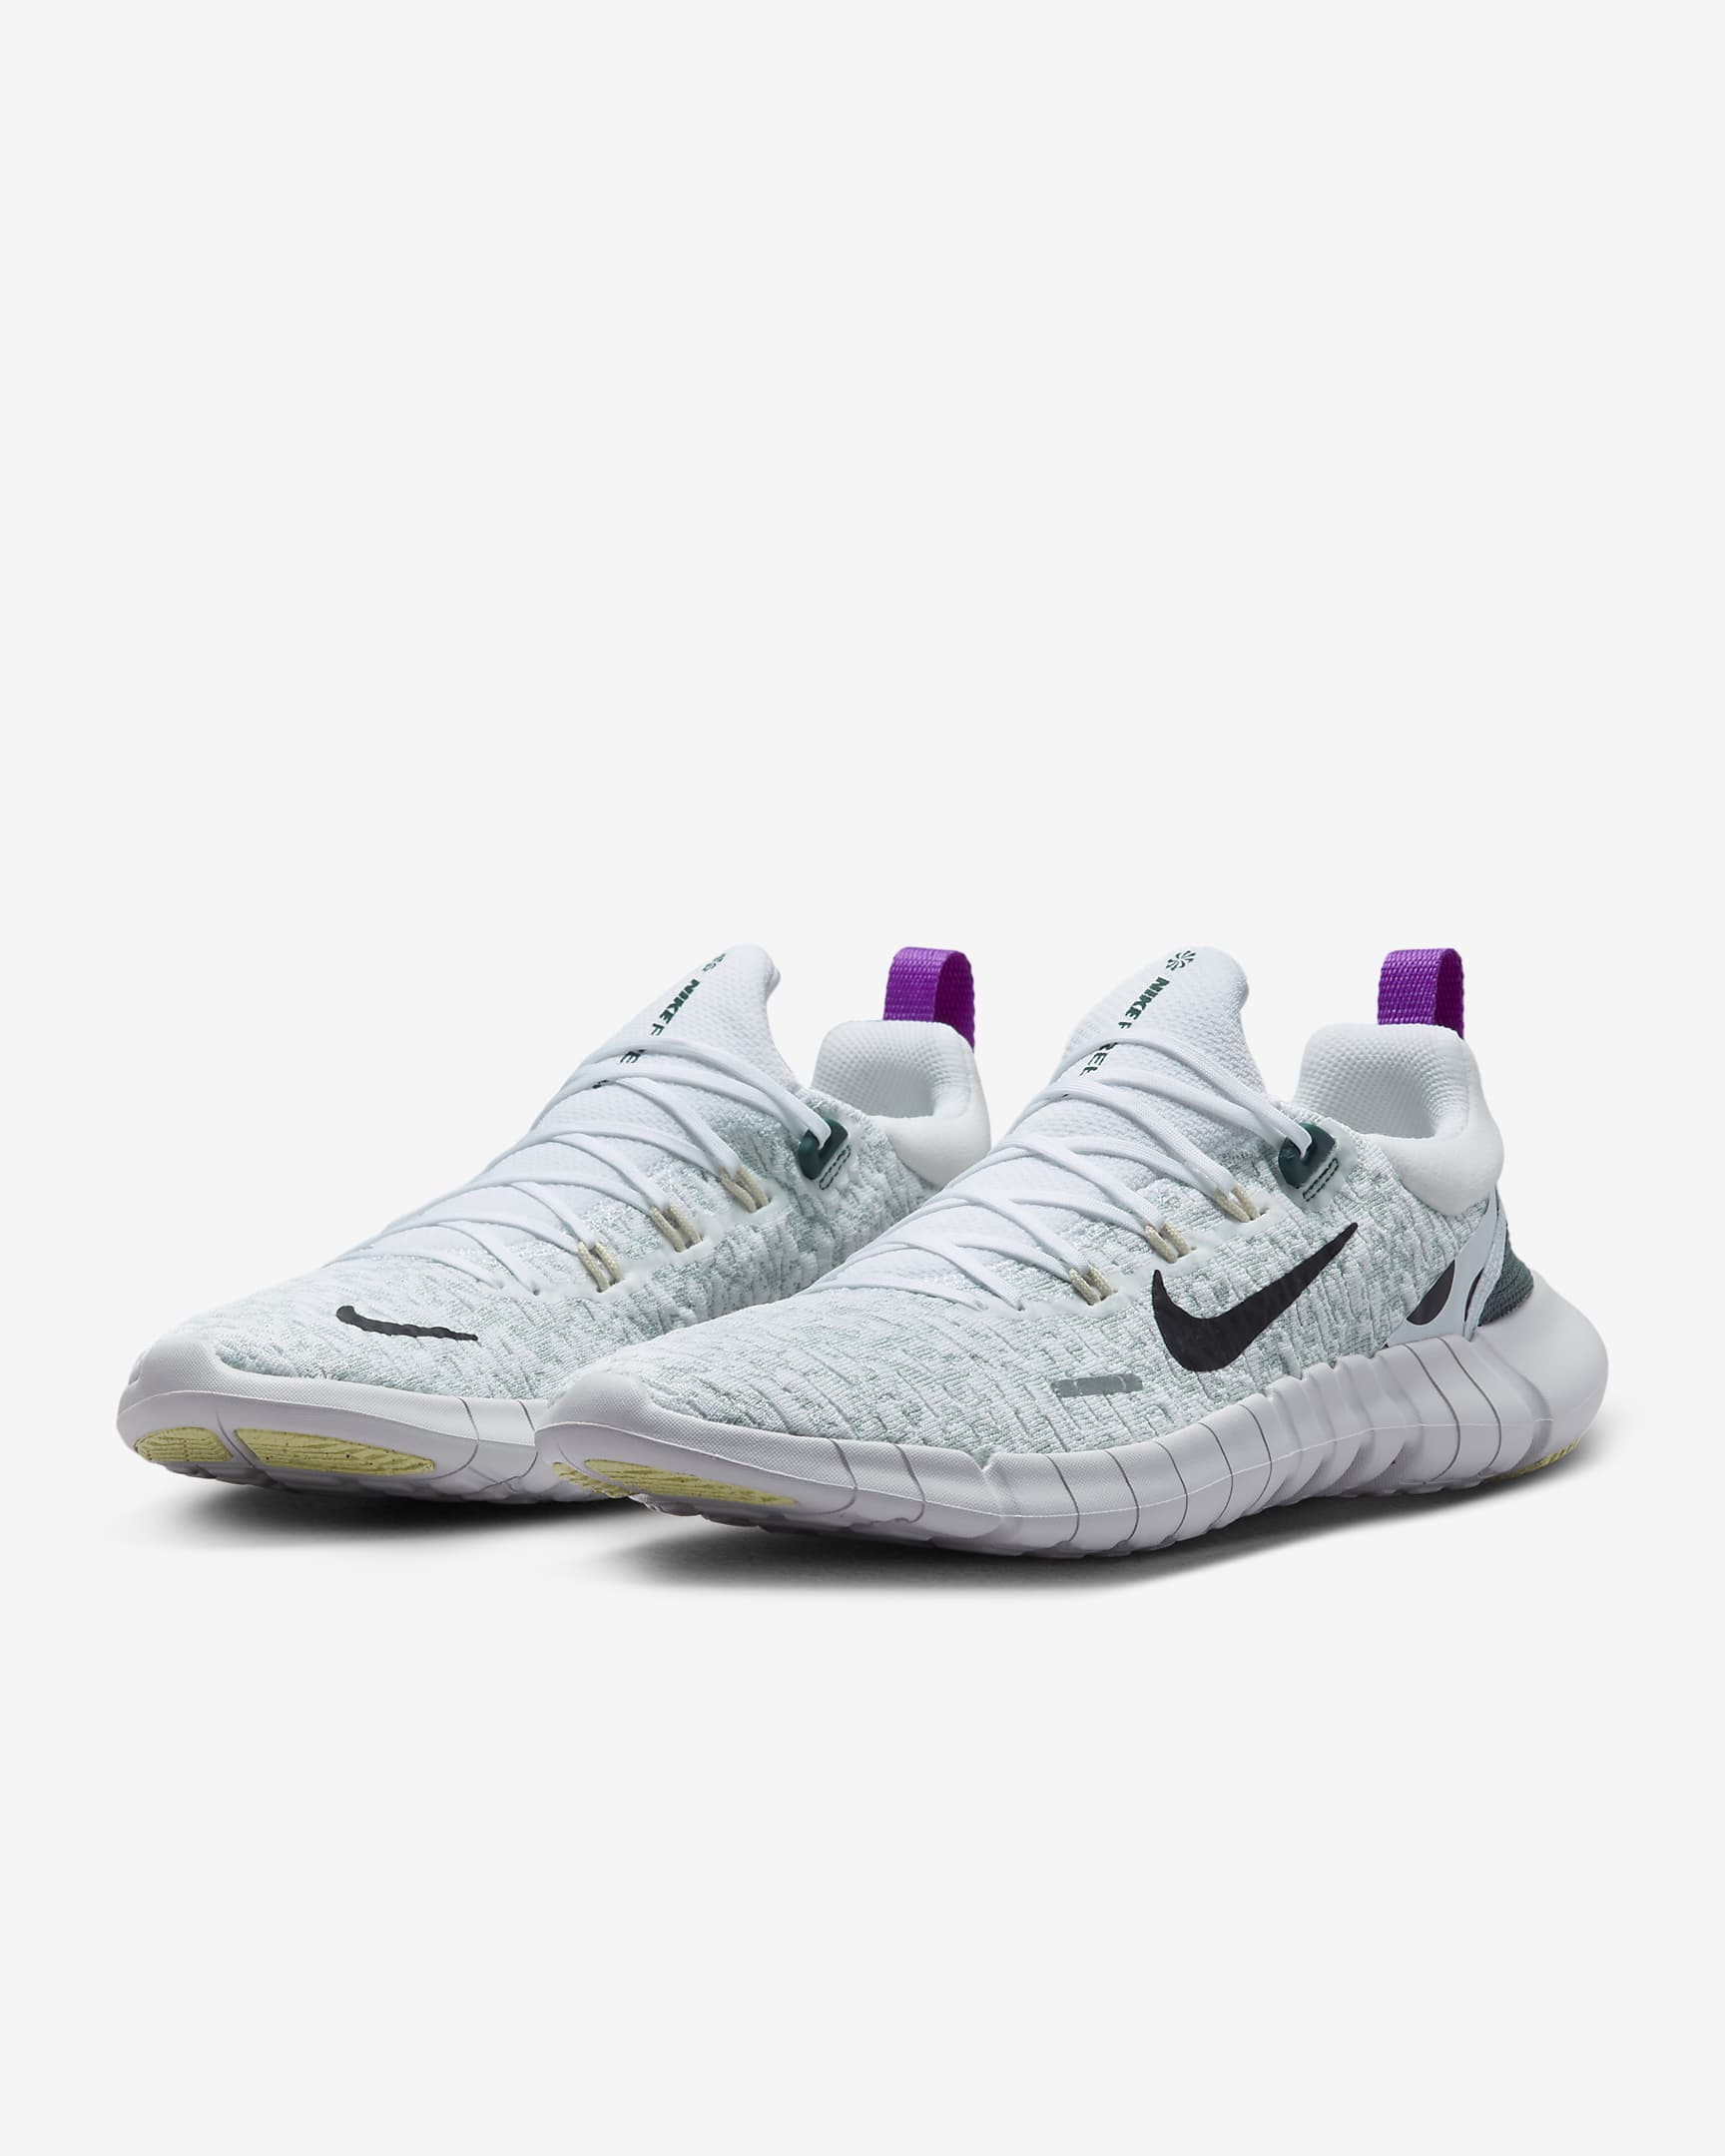 Nike Free Run 5.0 Men's Road Running Shoes - White/Light Silver/Faded Spruce/Black